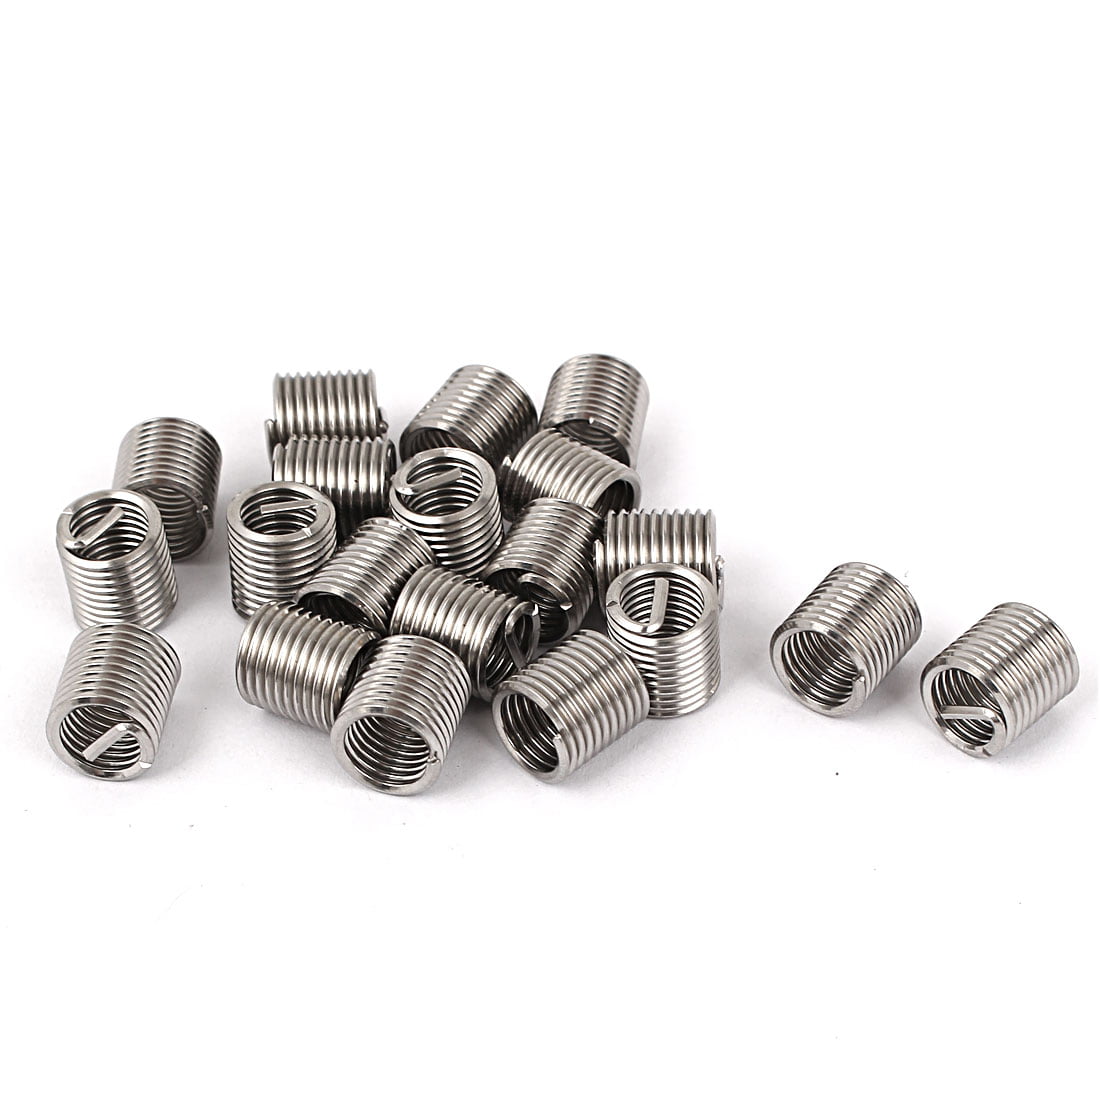 Akozon Screws Sleeve Set 110pcs M6-M8/1D-3D Coiled Wire Thread Insert Stainless Steel Thread 